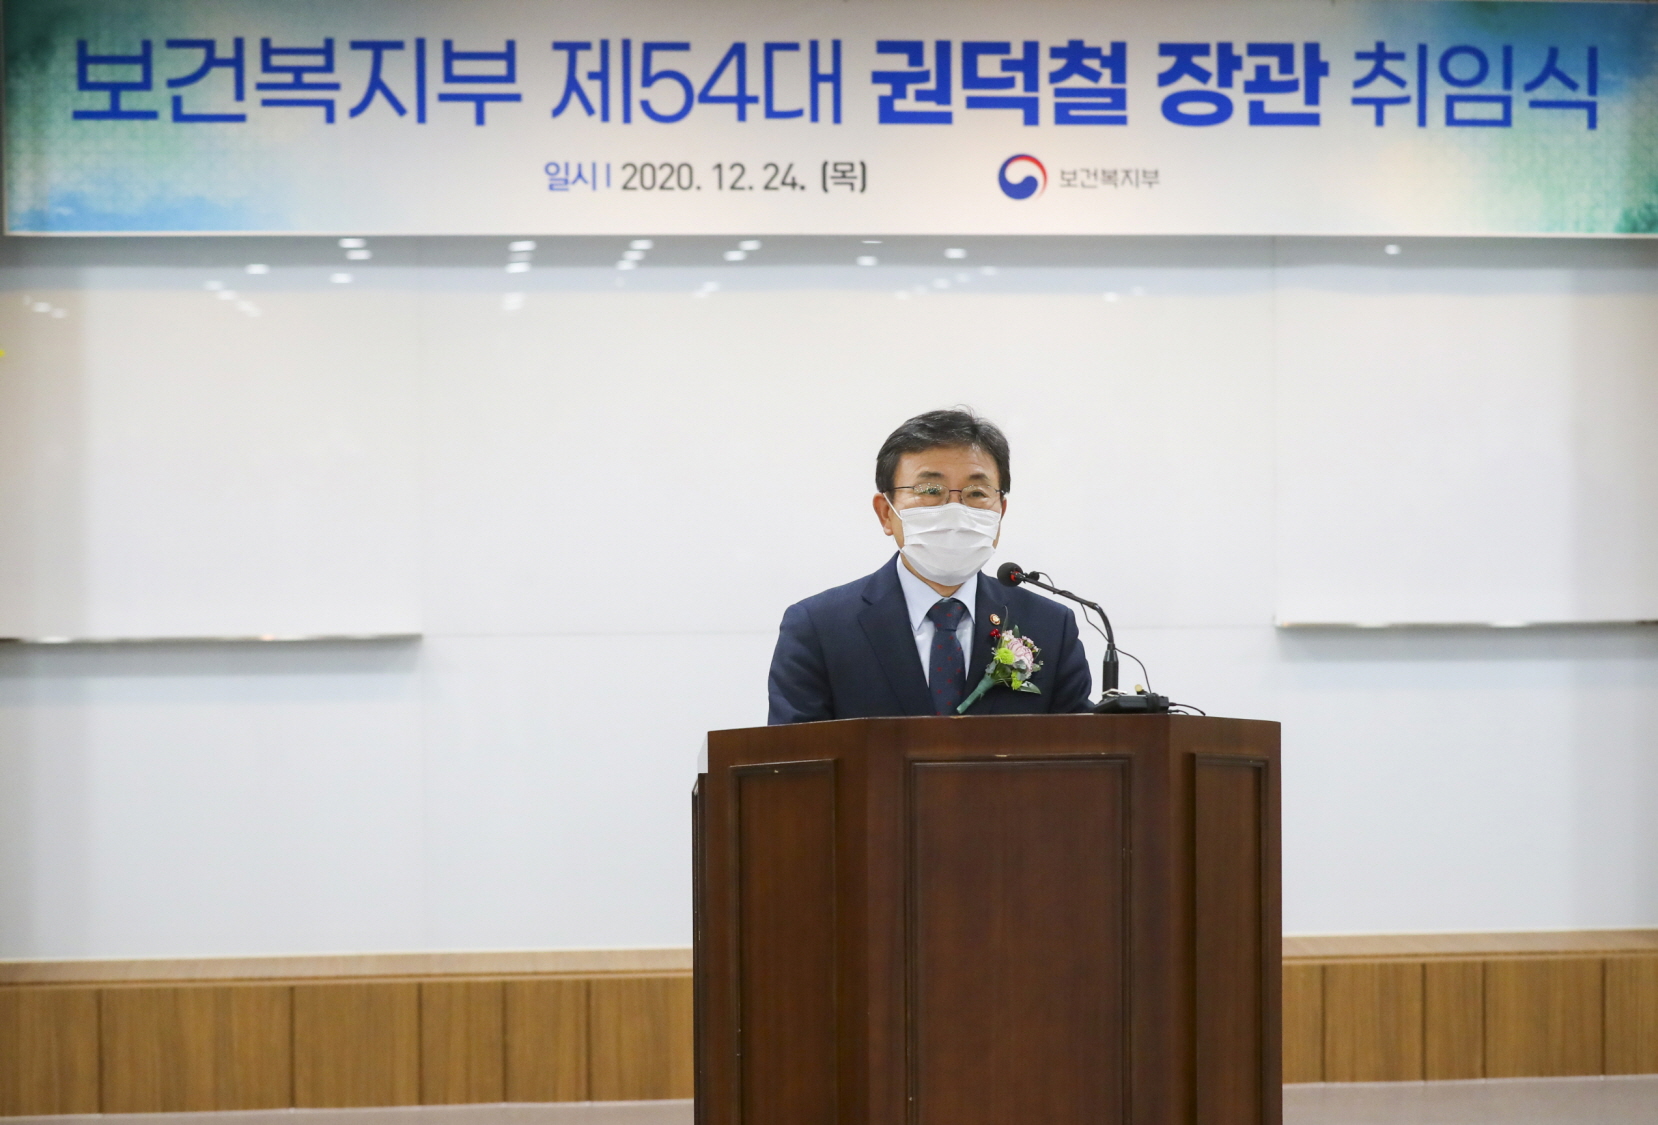 Mr. Kwon Deok-cheol Inaugurated as the 54th Minister of Health and Welfare (December 24) 사진7